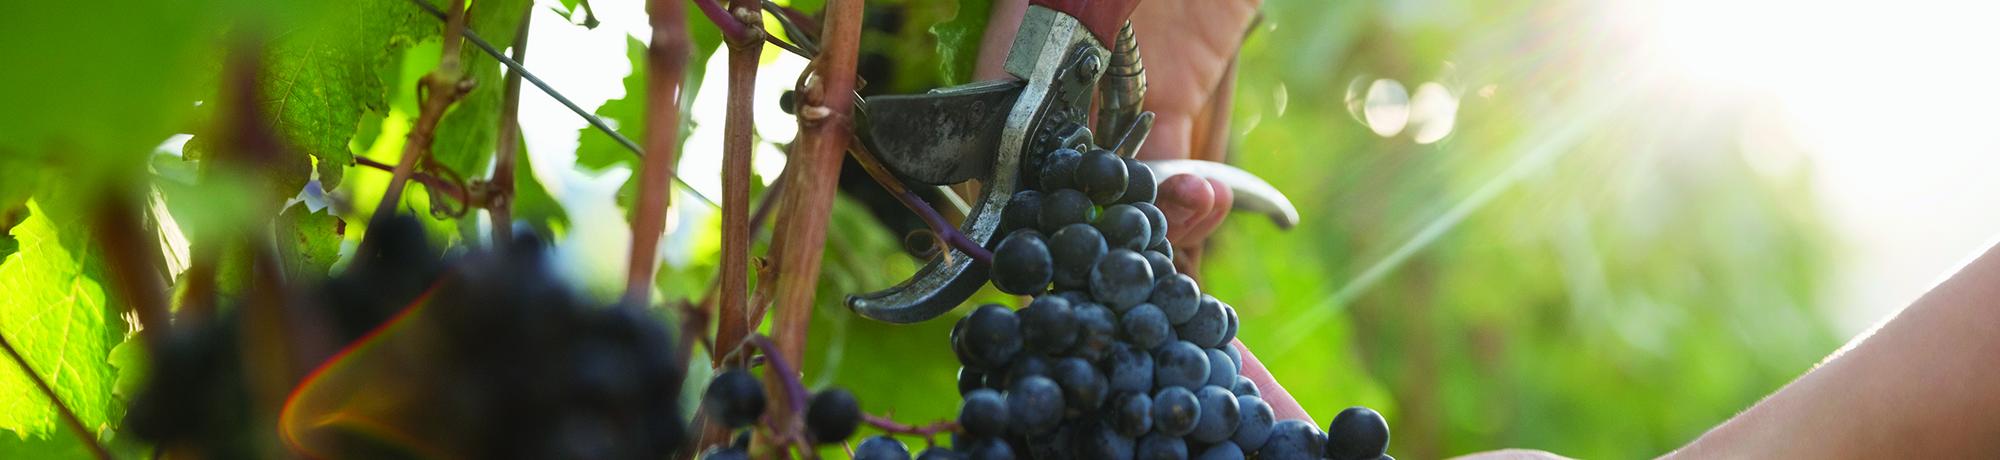 close up of wine grapes on vine